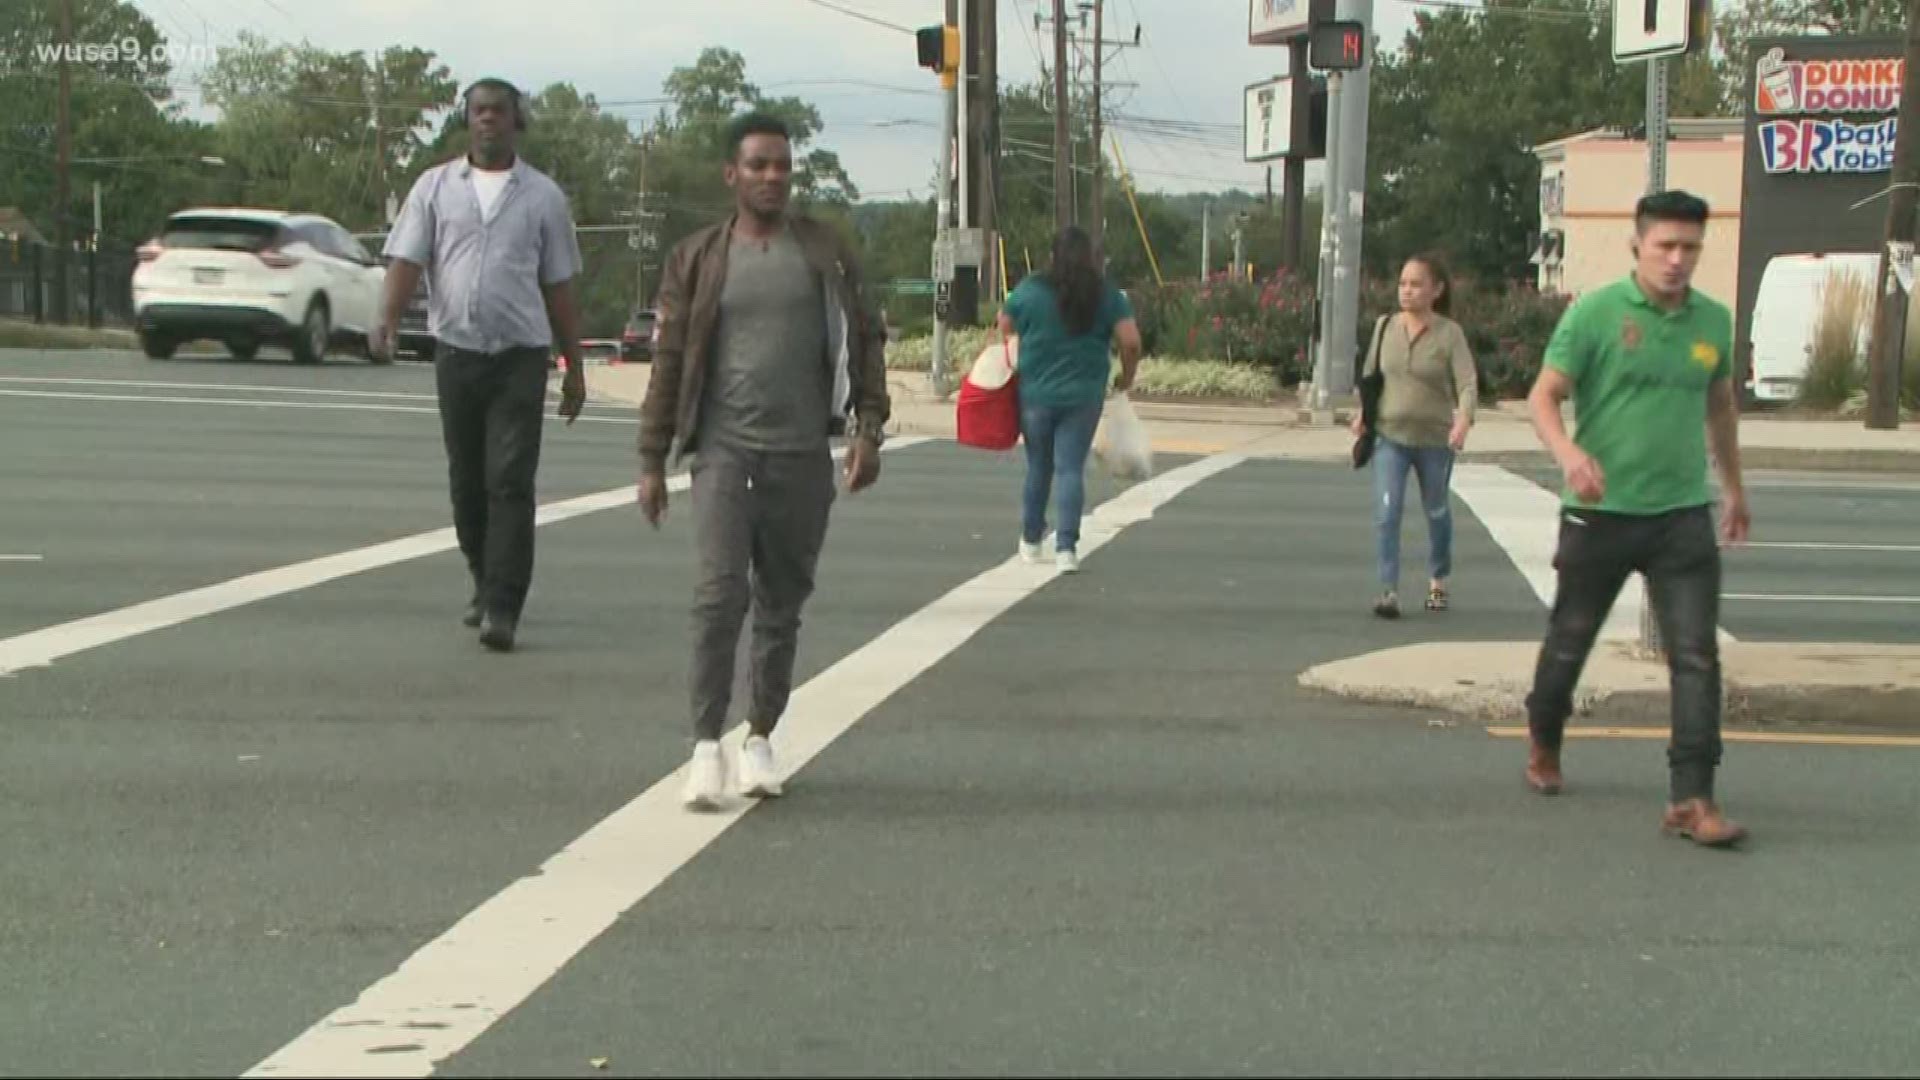 Montgomery County officials are trying to make the roads safer for pedestrians.